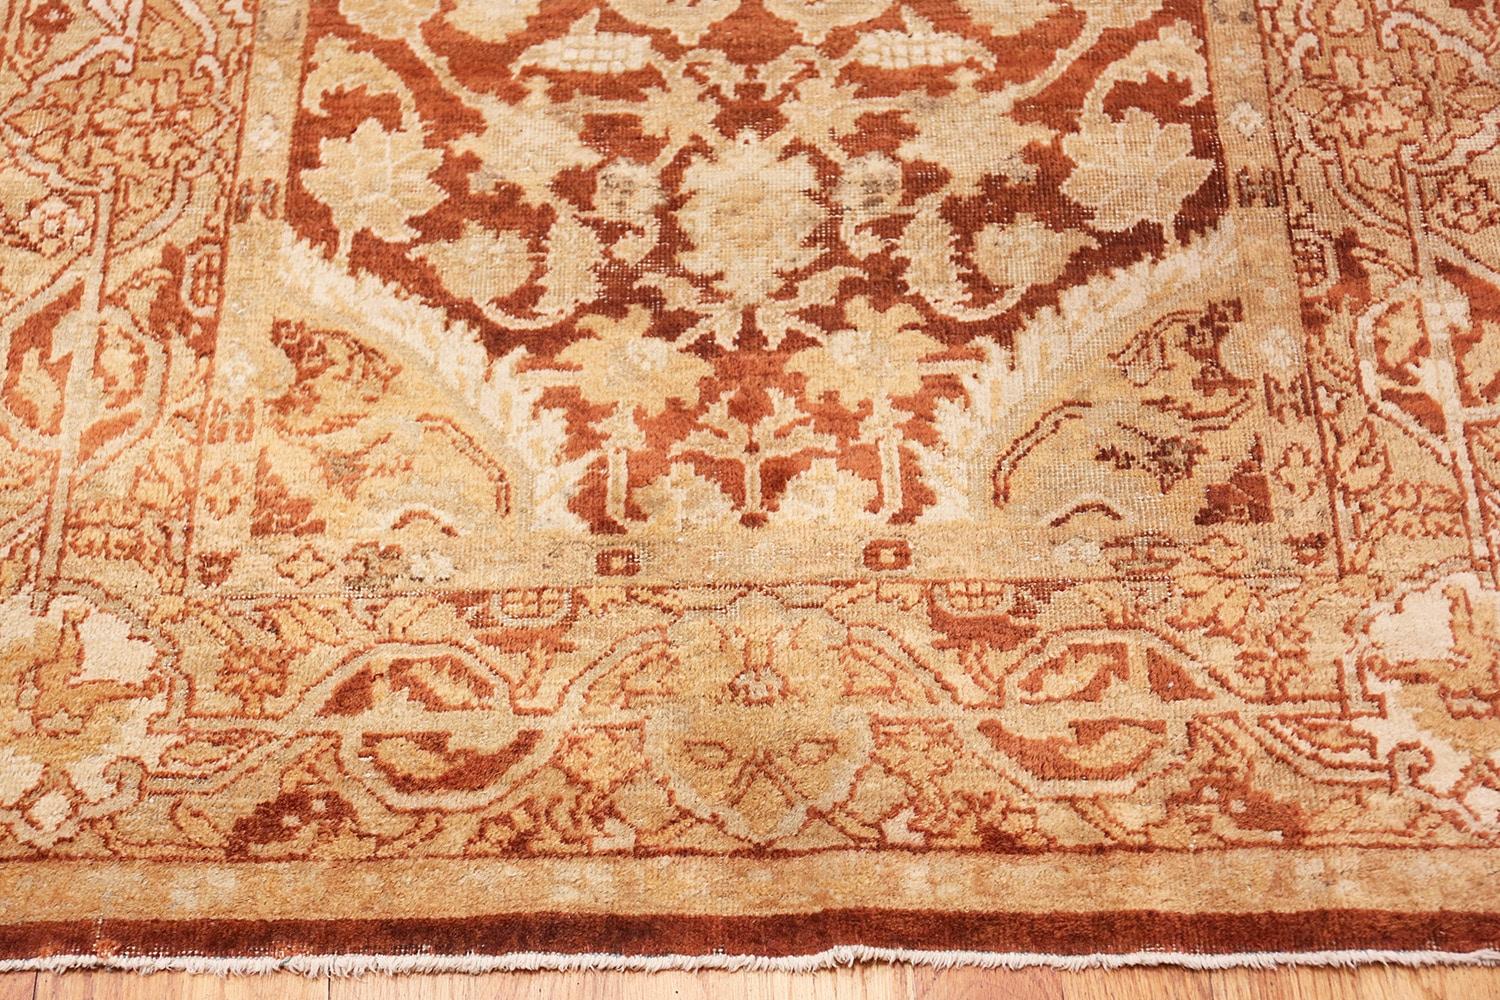 Small and decorative antique Indian Amritsar rug, country of origin: India, date circa early 20th century. Size: 4 ft x 7 ft 2 in (1.22 m x 2.18 m).